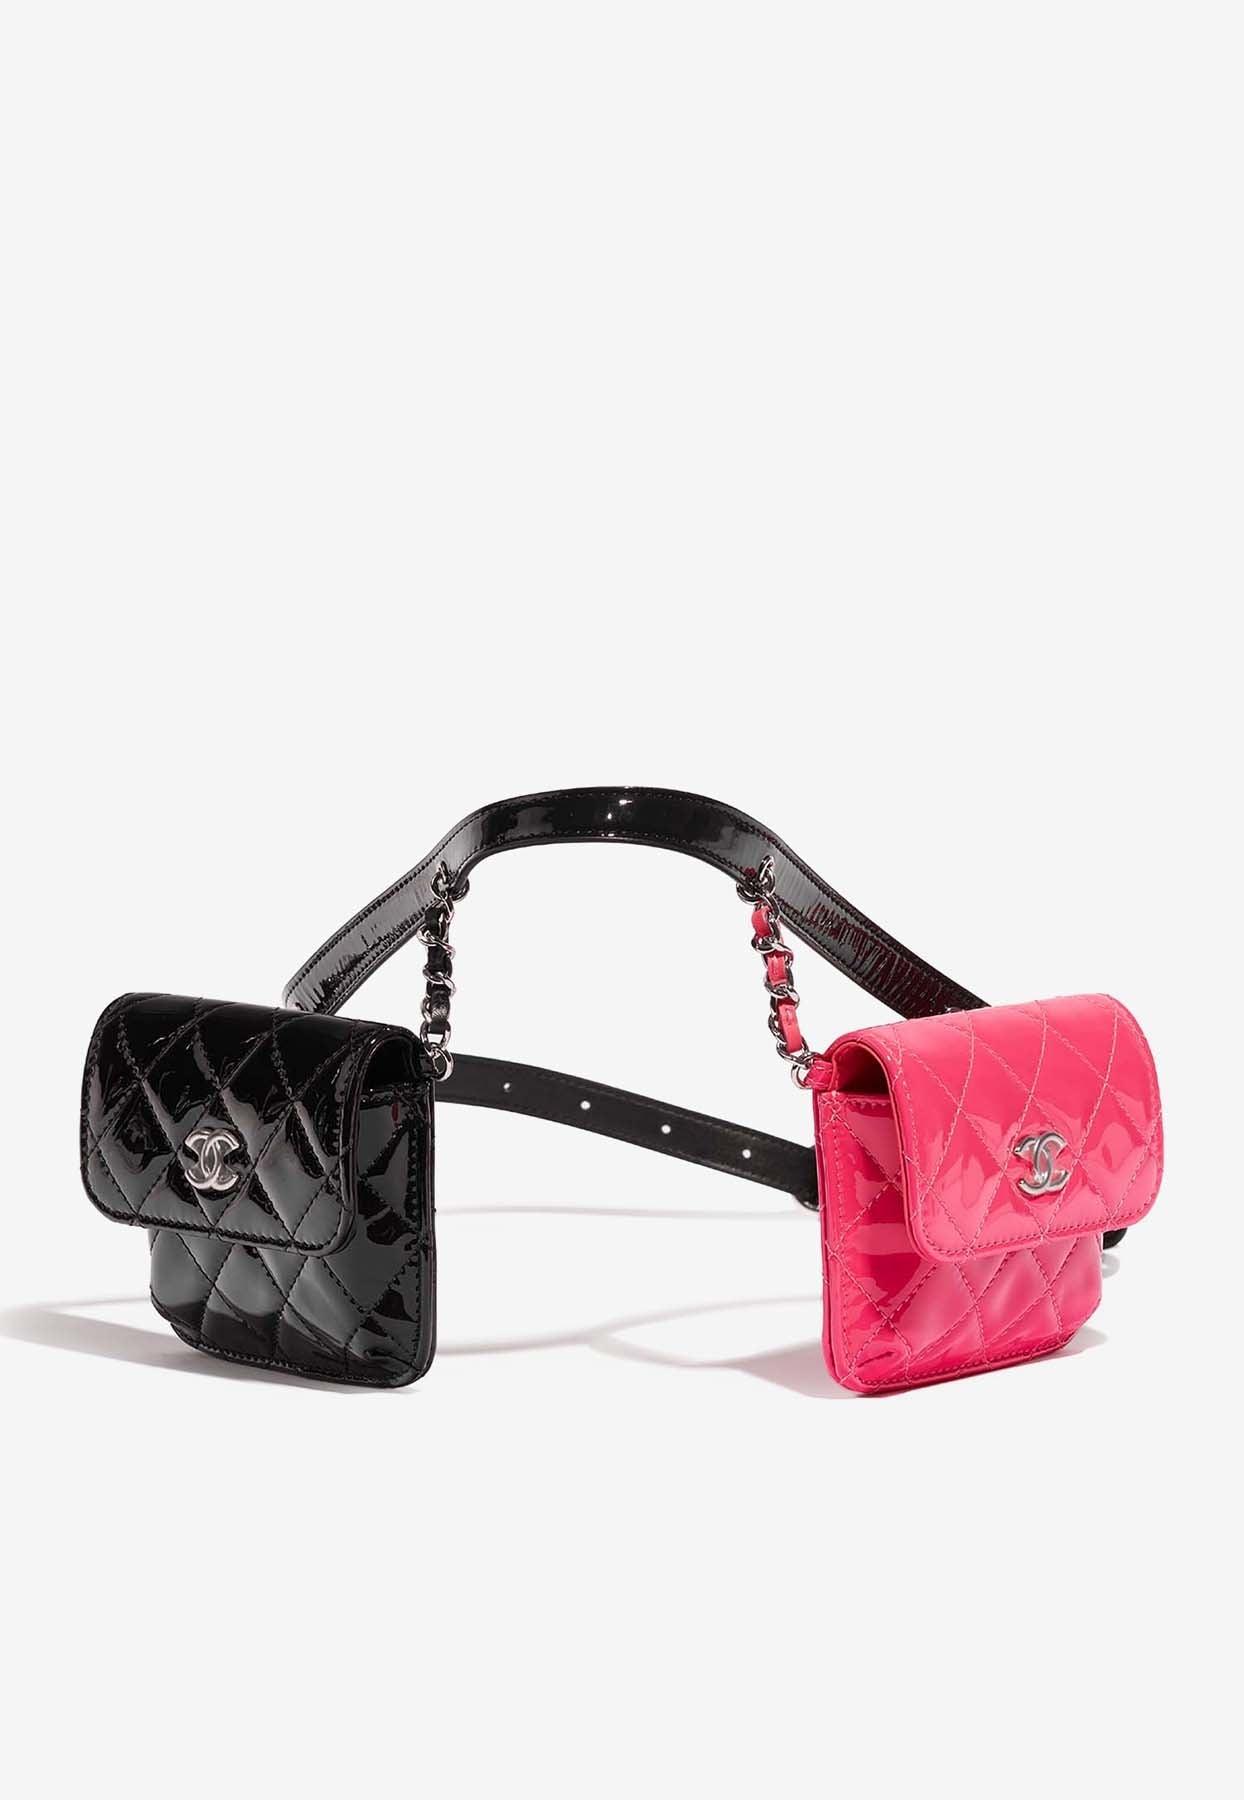 chanel pink and black purse leather